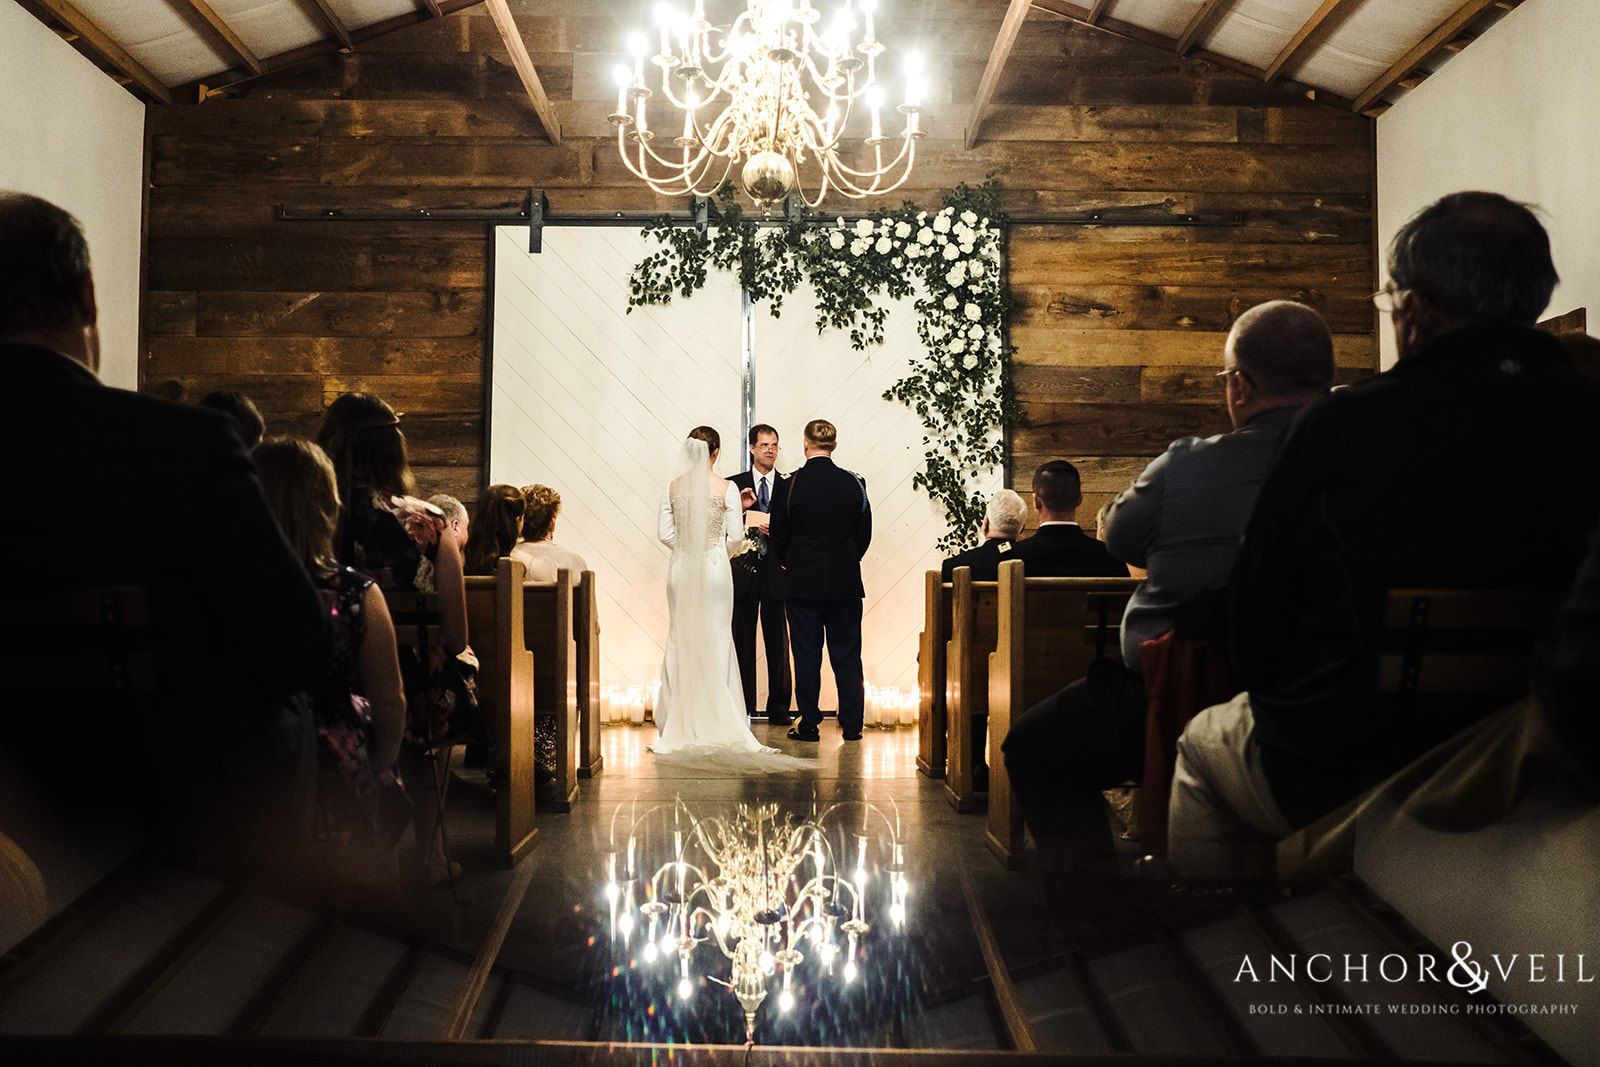 The beautiful lighting during the ceremony at the Circle M Farms Wedding